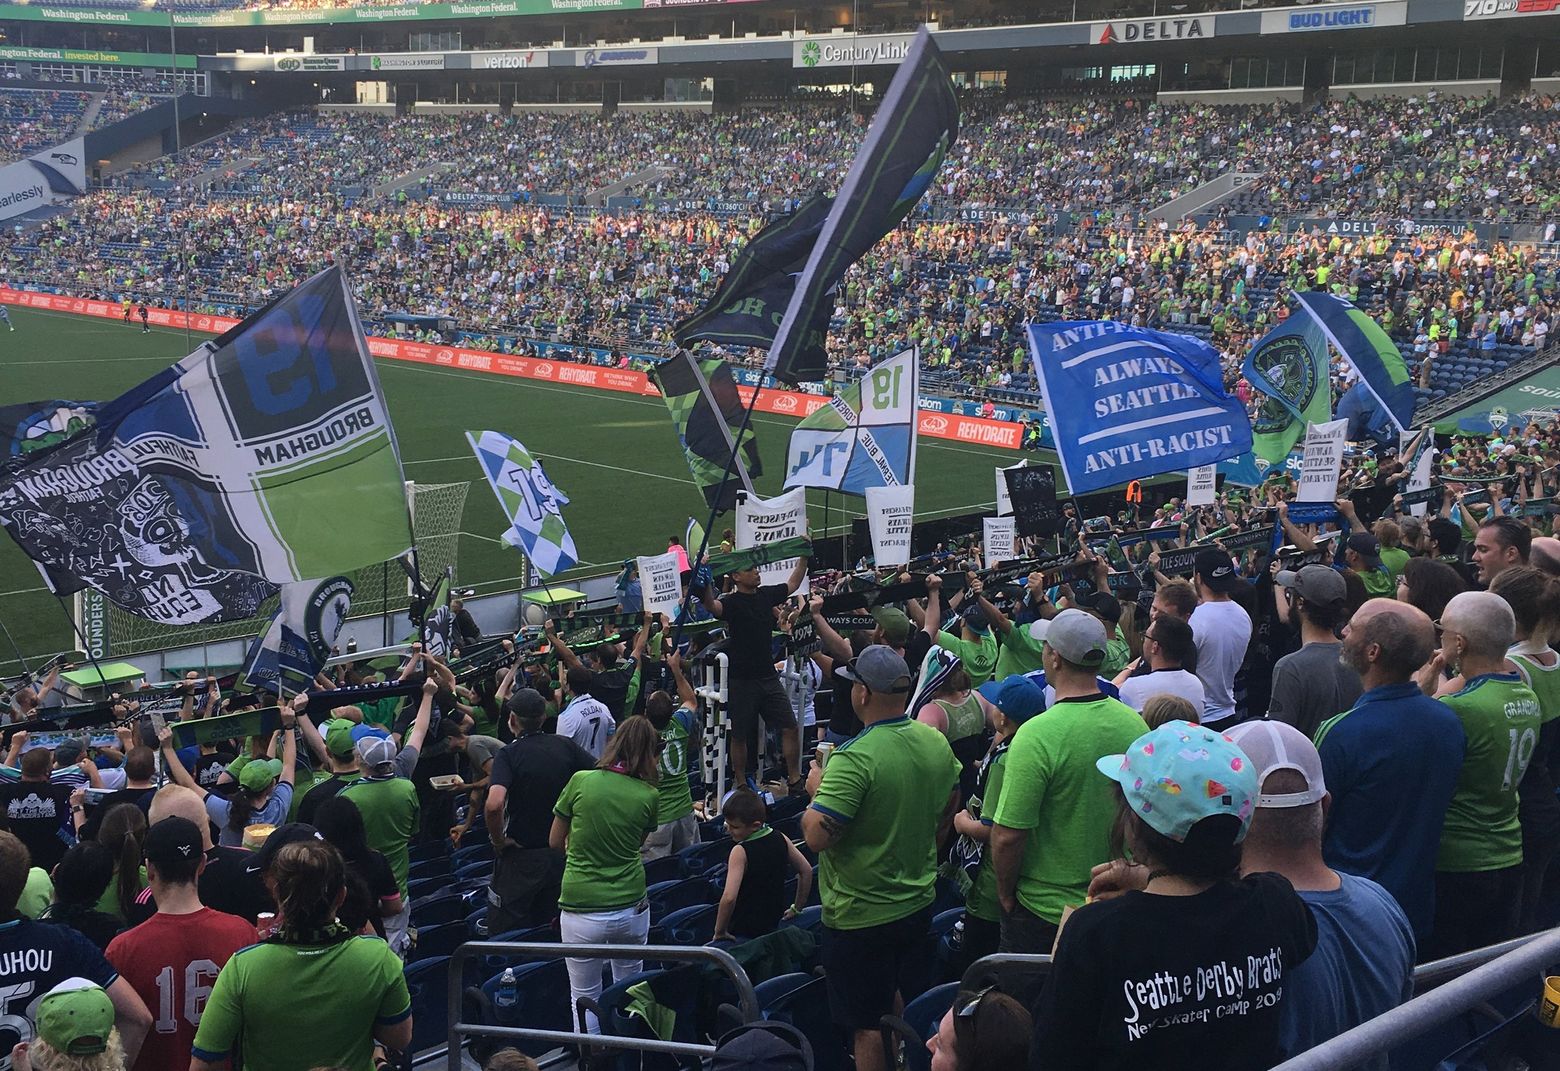 Fans to Sounders match hear curses people who pledge allegiance to Proud Boys | The Seattle Times